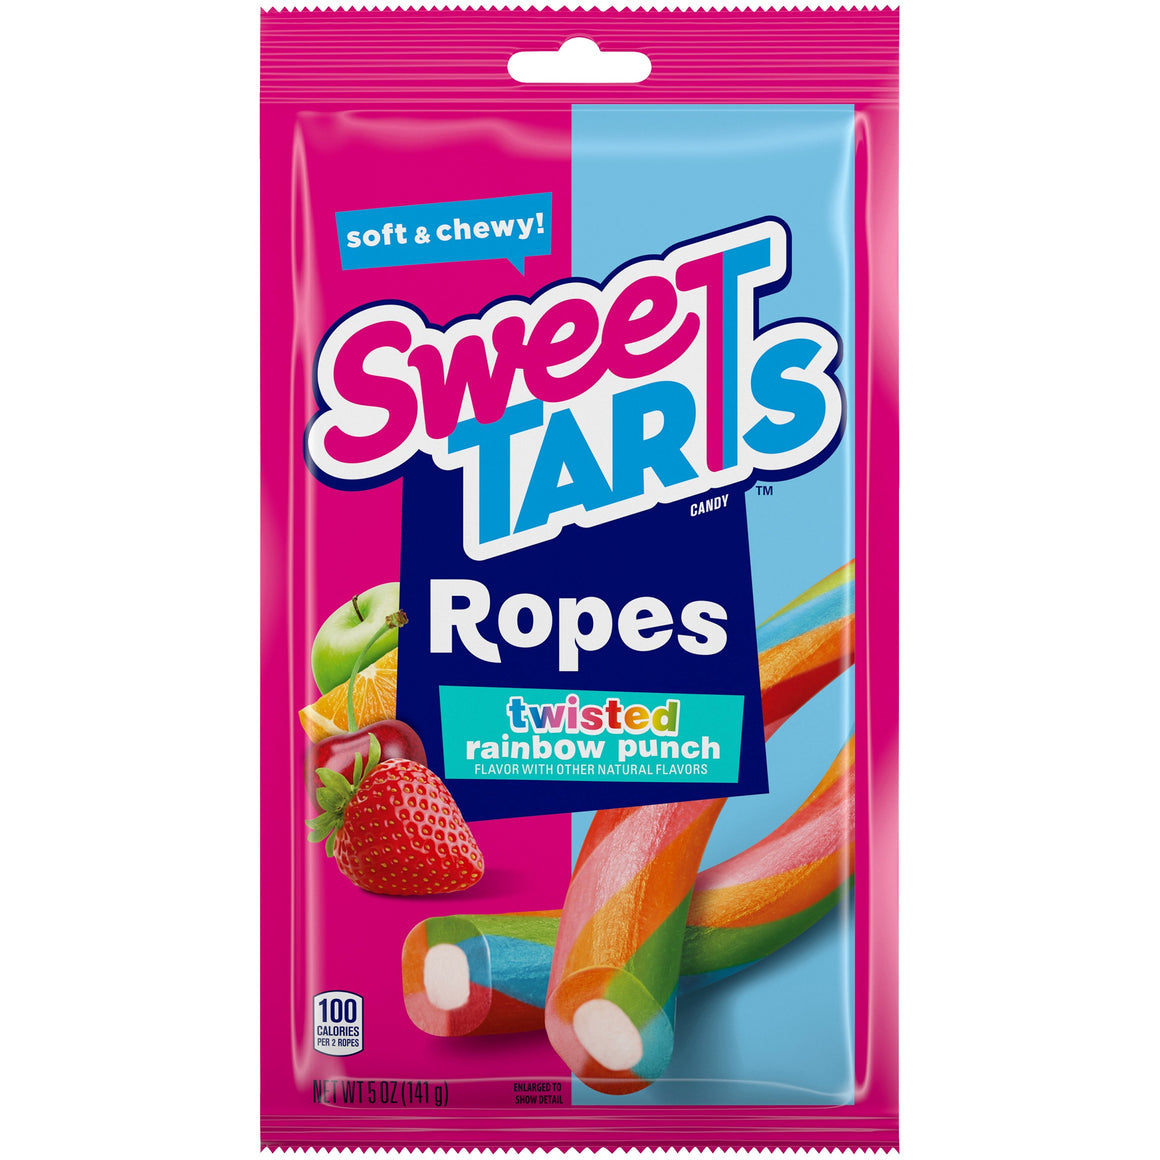 All City Candy SweeTARTS Ropes Soft & Chewy Twisted Rainbow Punch Candy - 3.5-oz. Bag Licorice Ferrara Candy Company For fresh candy and great service, visit www.allcitycandy.com